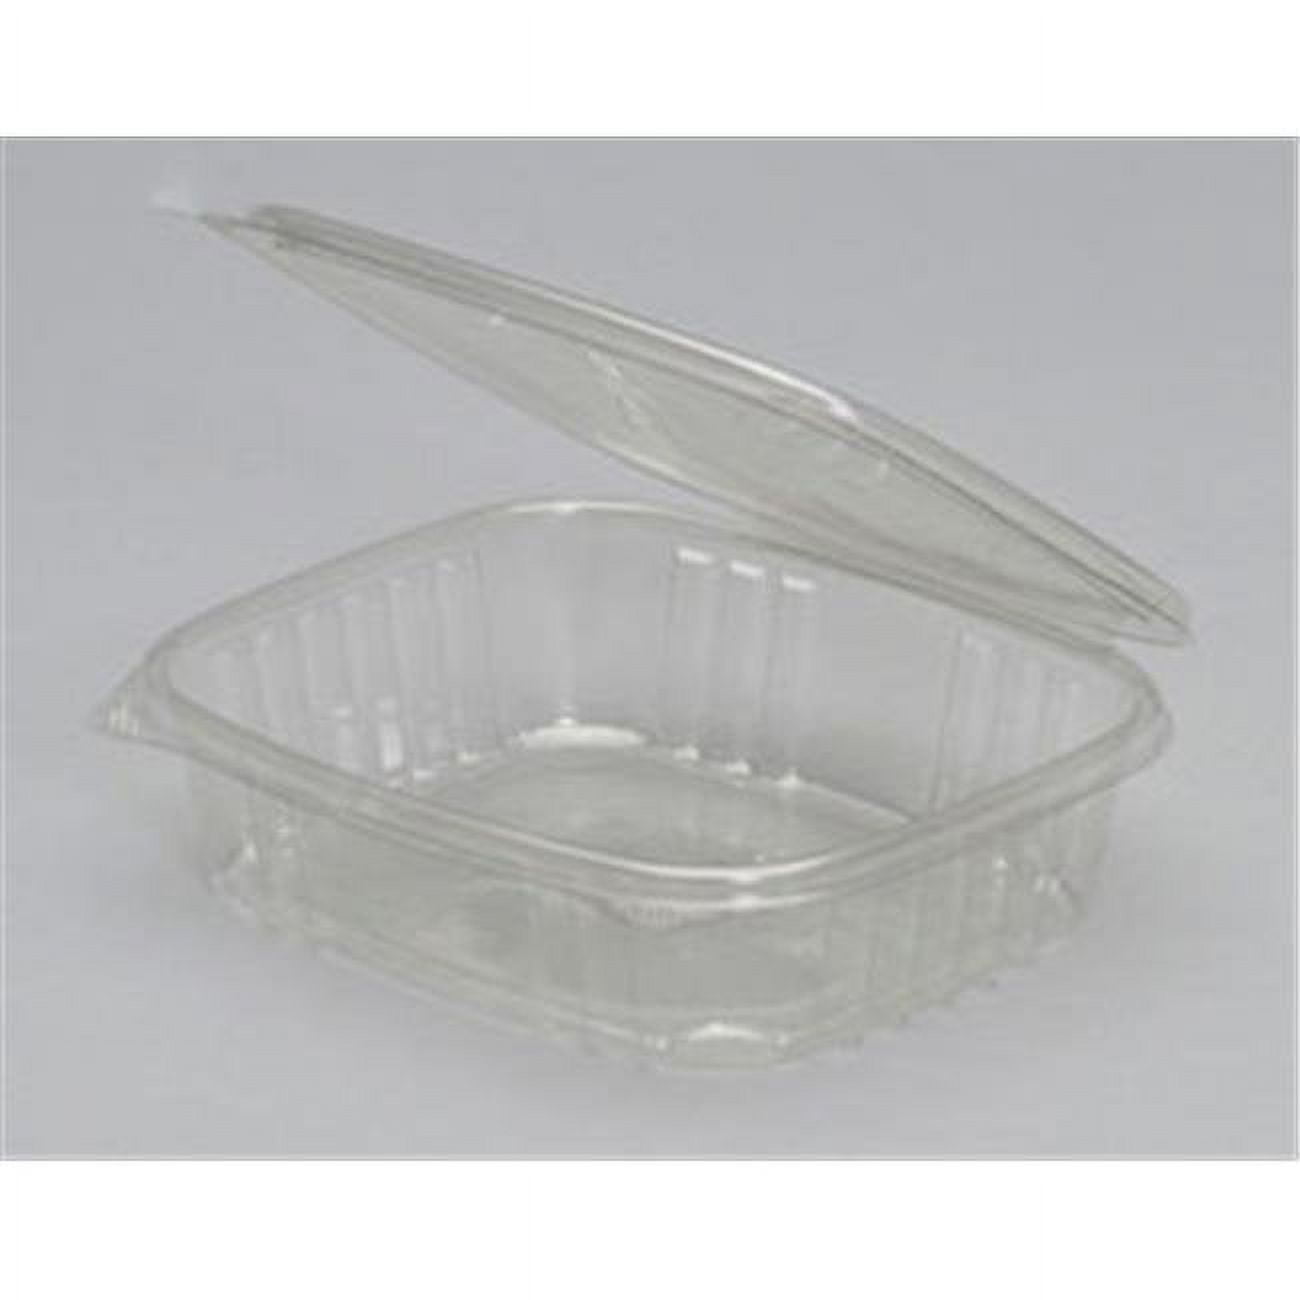 Genpak 24 Oz Clear Deli Container With Hinged Lid 200 SKU